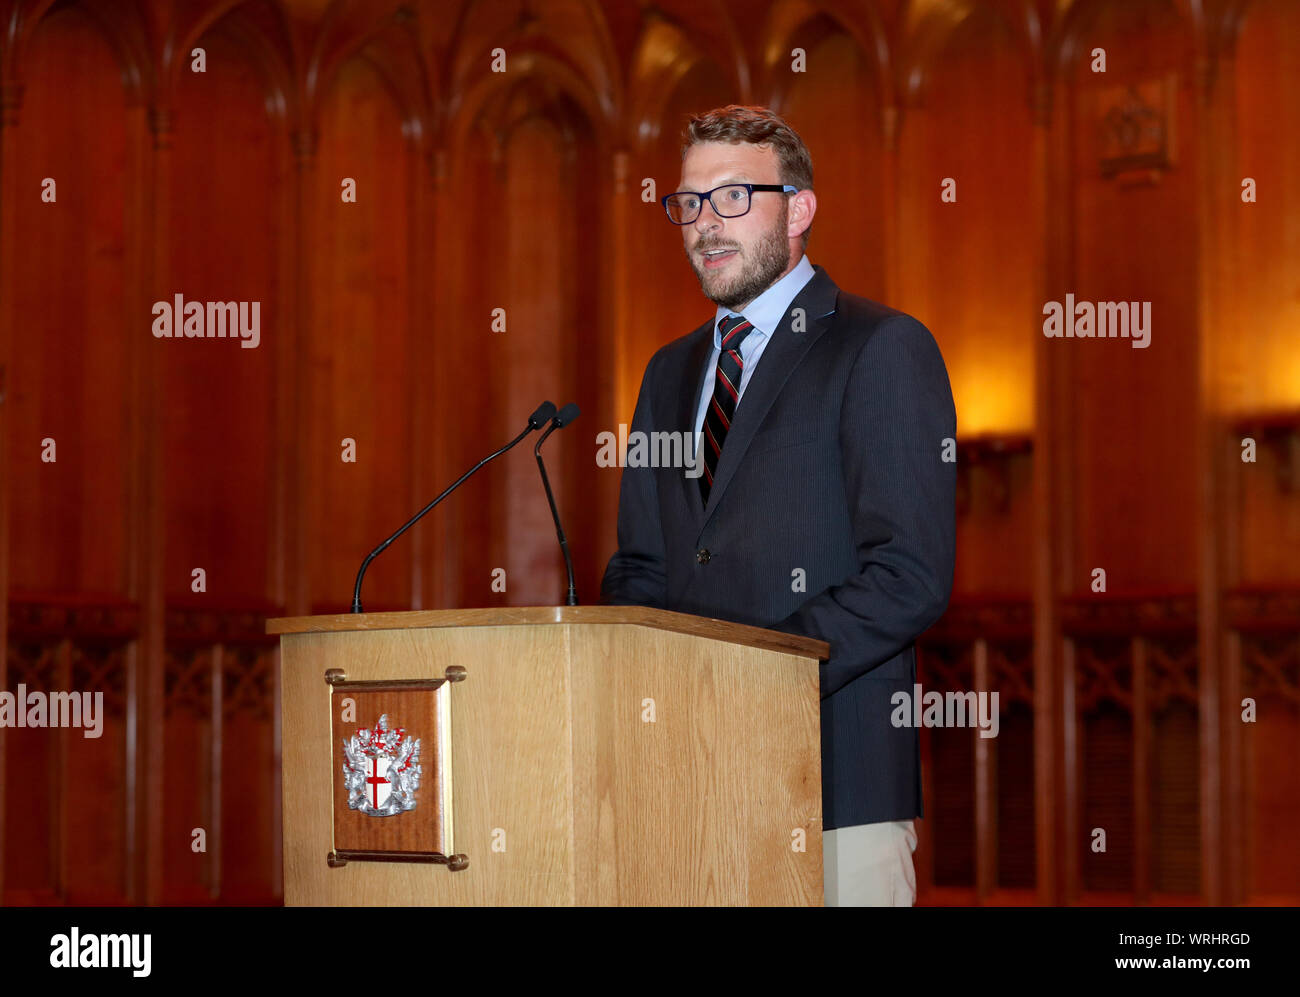 JJ Chalmers speaks during a reception, attended by the Duke of Sussex to celebrate the fifth anniversary of the Invictus Games at the Guildhall in central London. Stock Photo